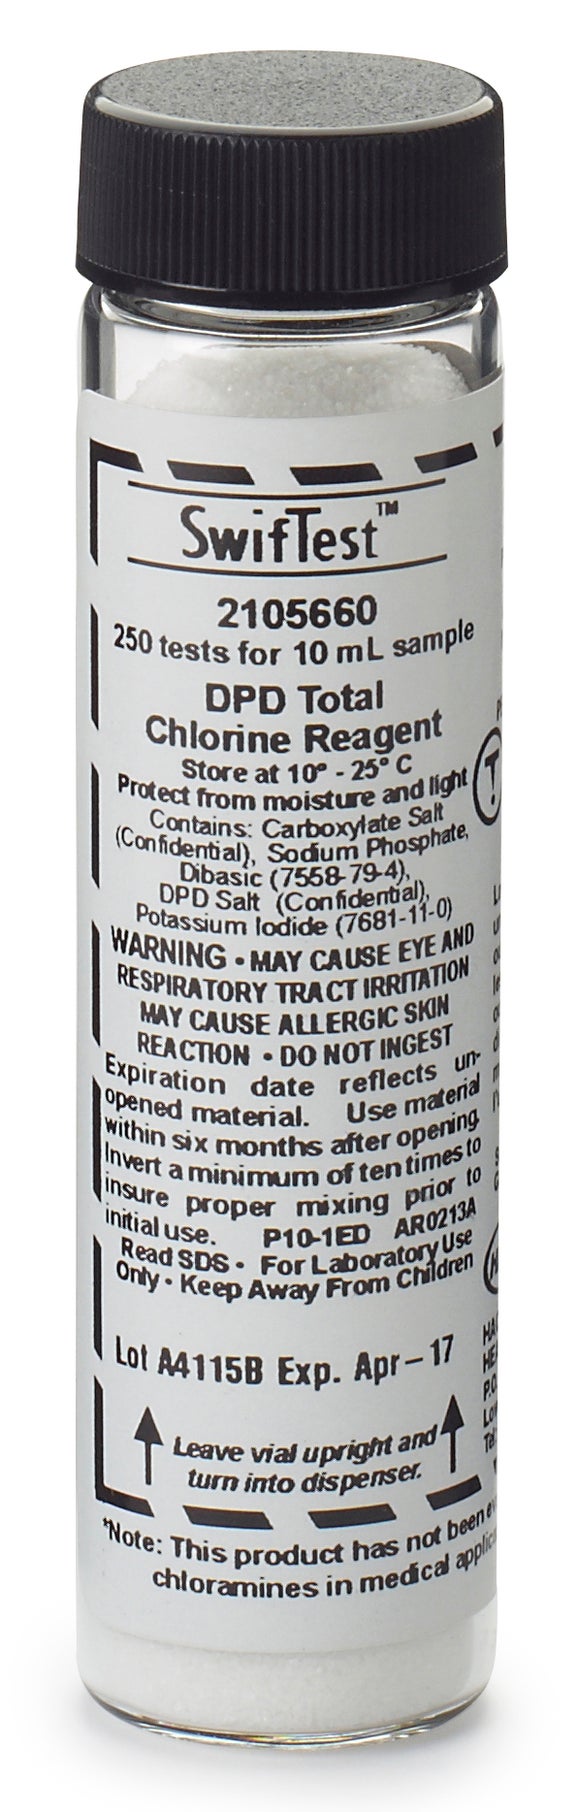 DPD Total Chlorine Swiftest™ Dispenser Refill Vial, 250 Tests, Hach